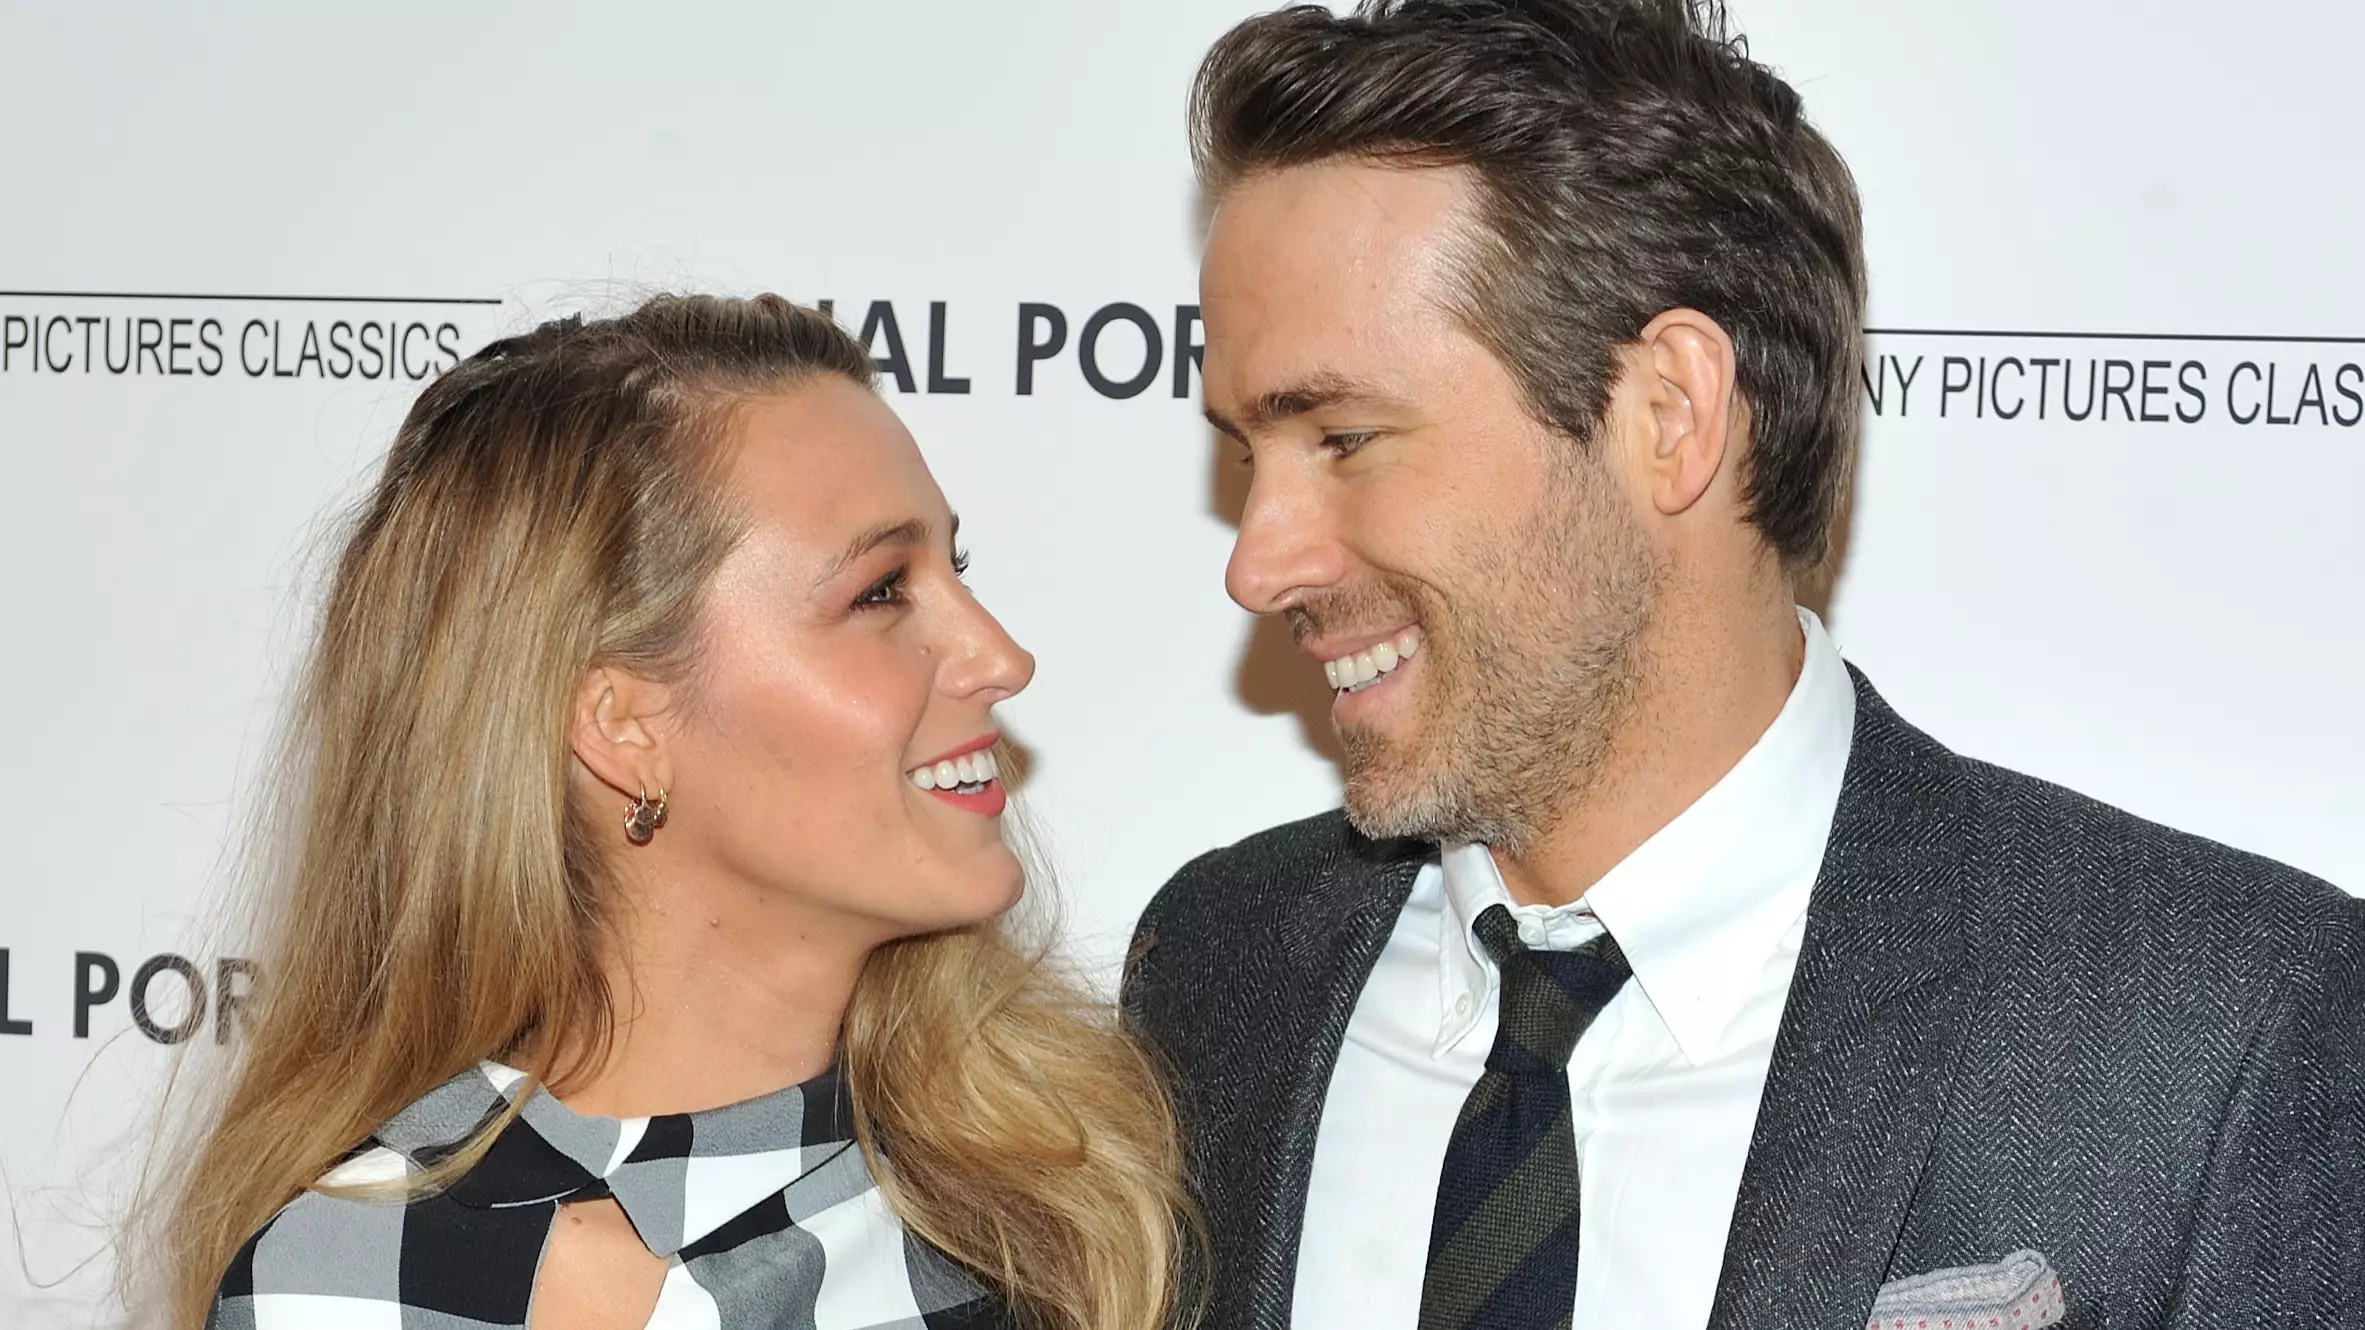 Ryan Reynolds Responds As You'd Expect To Blake Lively 'Unfollowing' Him 